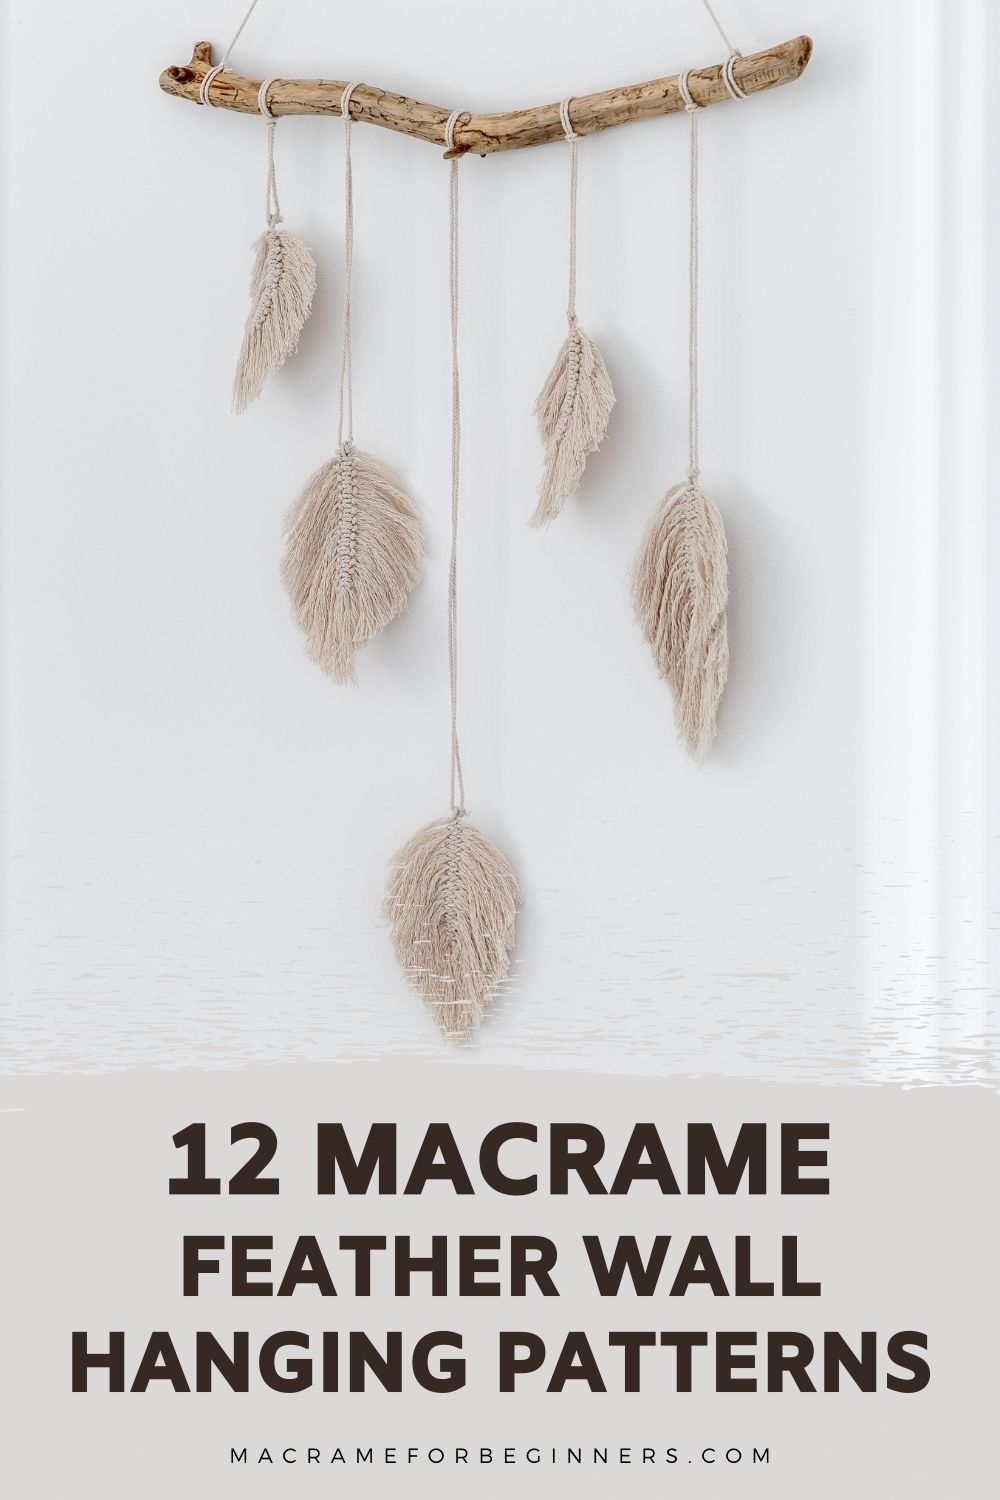 12 DIY Macrame Feather Wall Hanging Patterns for Beginners